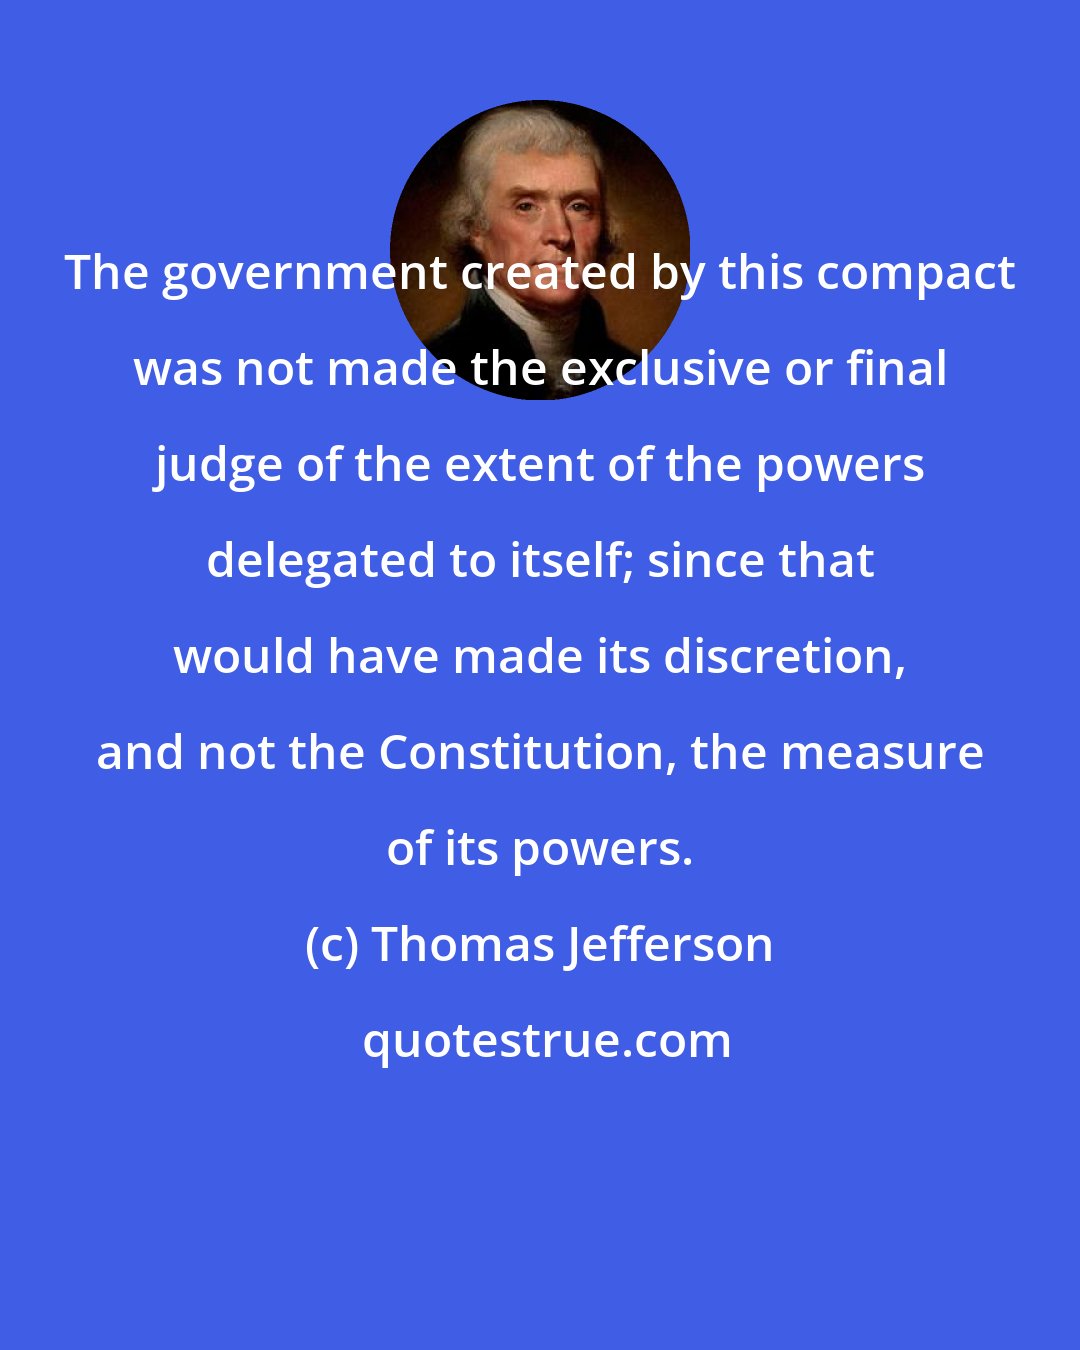 Thomas Jefferson: The government created by this compact was not made the exclusive or final judge of the extent of the powers delegated to itself; since that would have made its discretion, and not the Constitution, the measure of its powers.